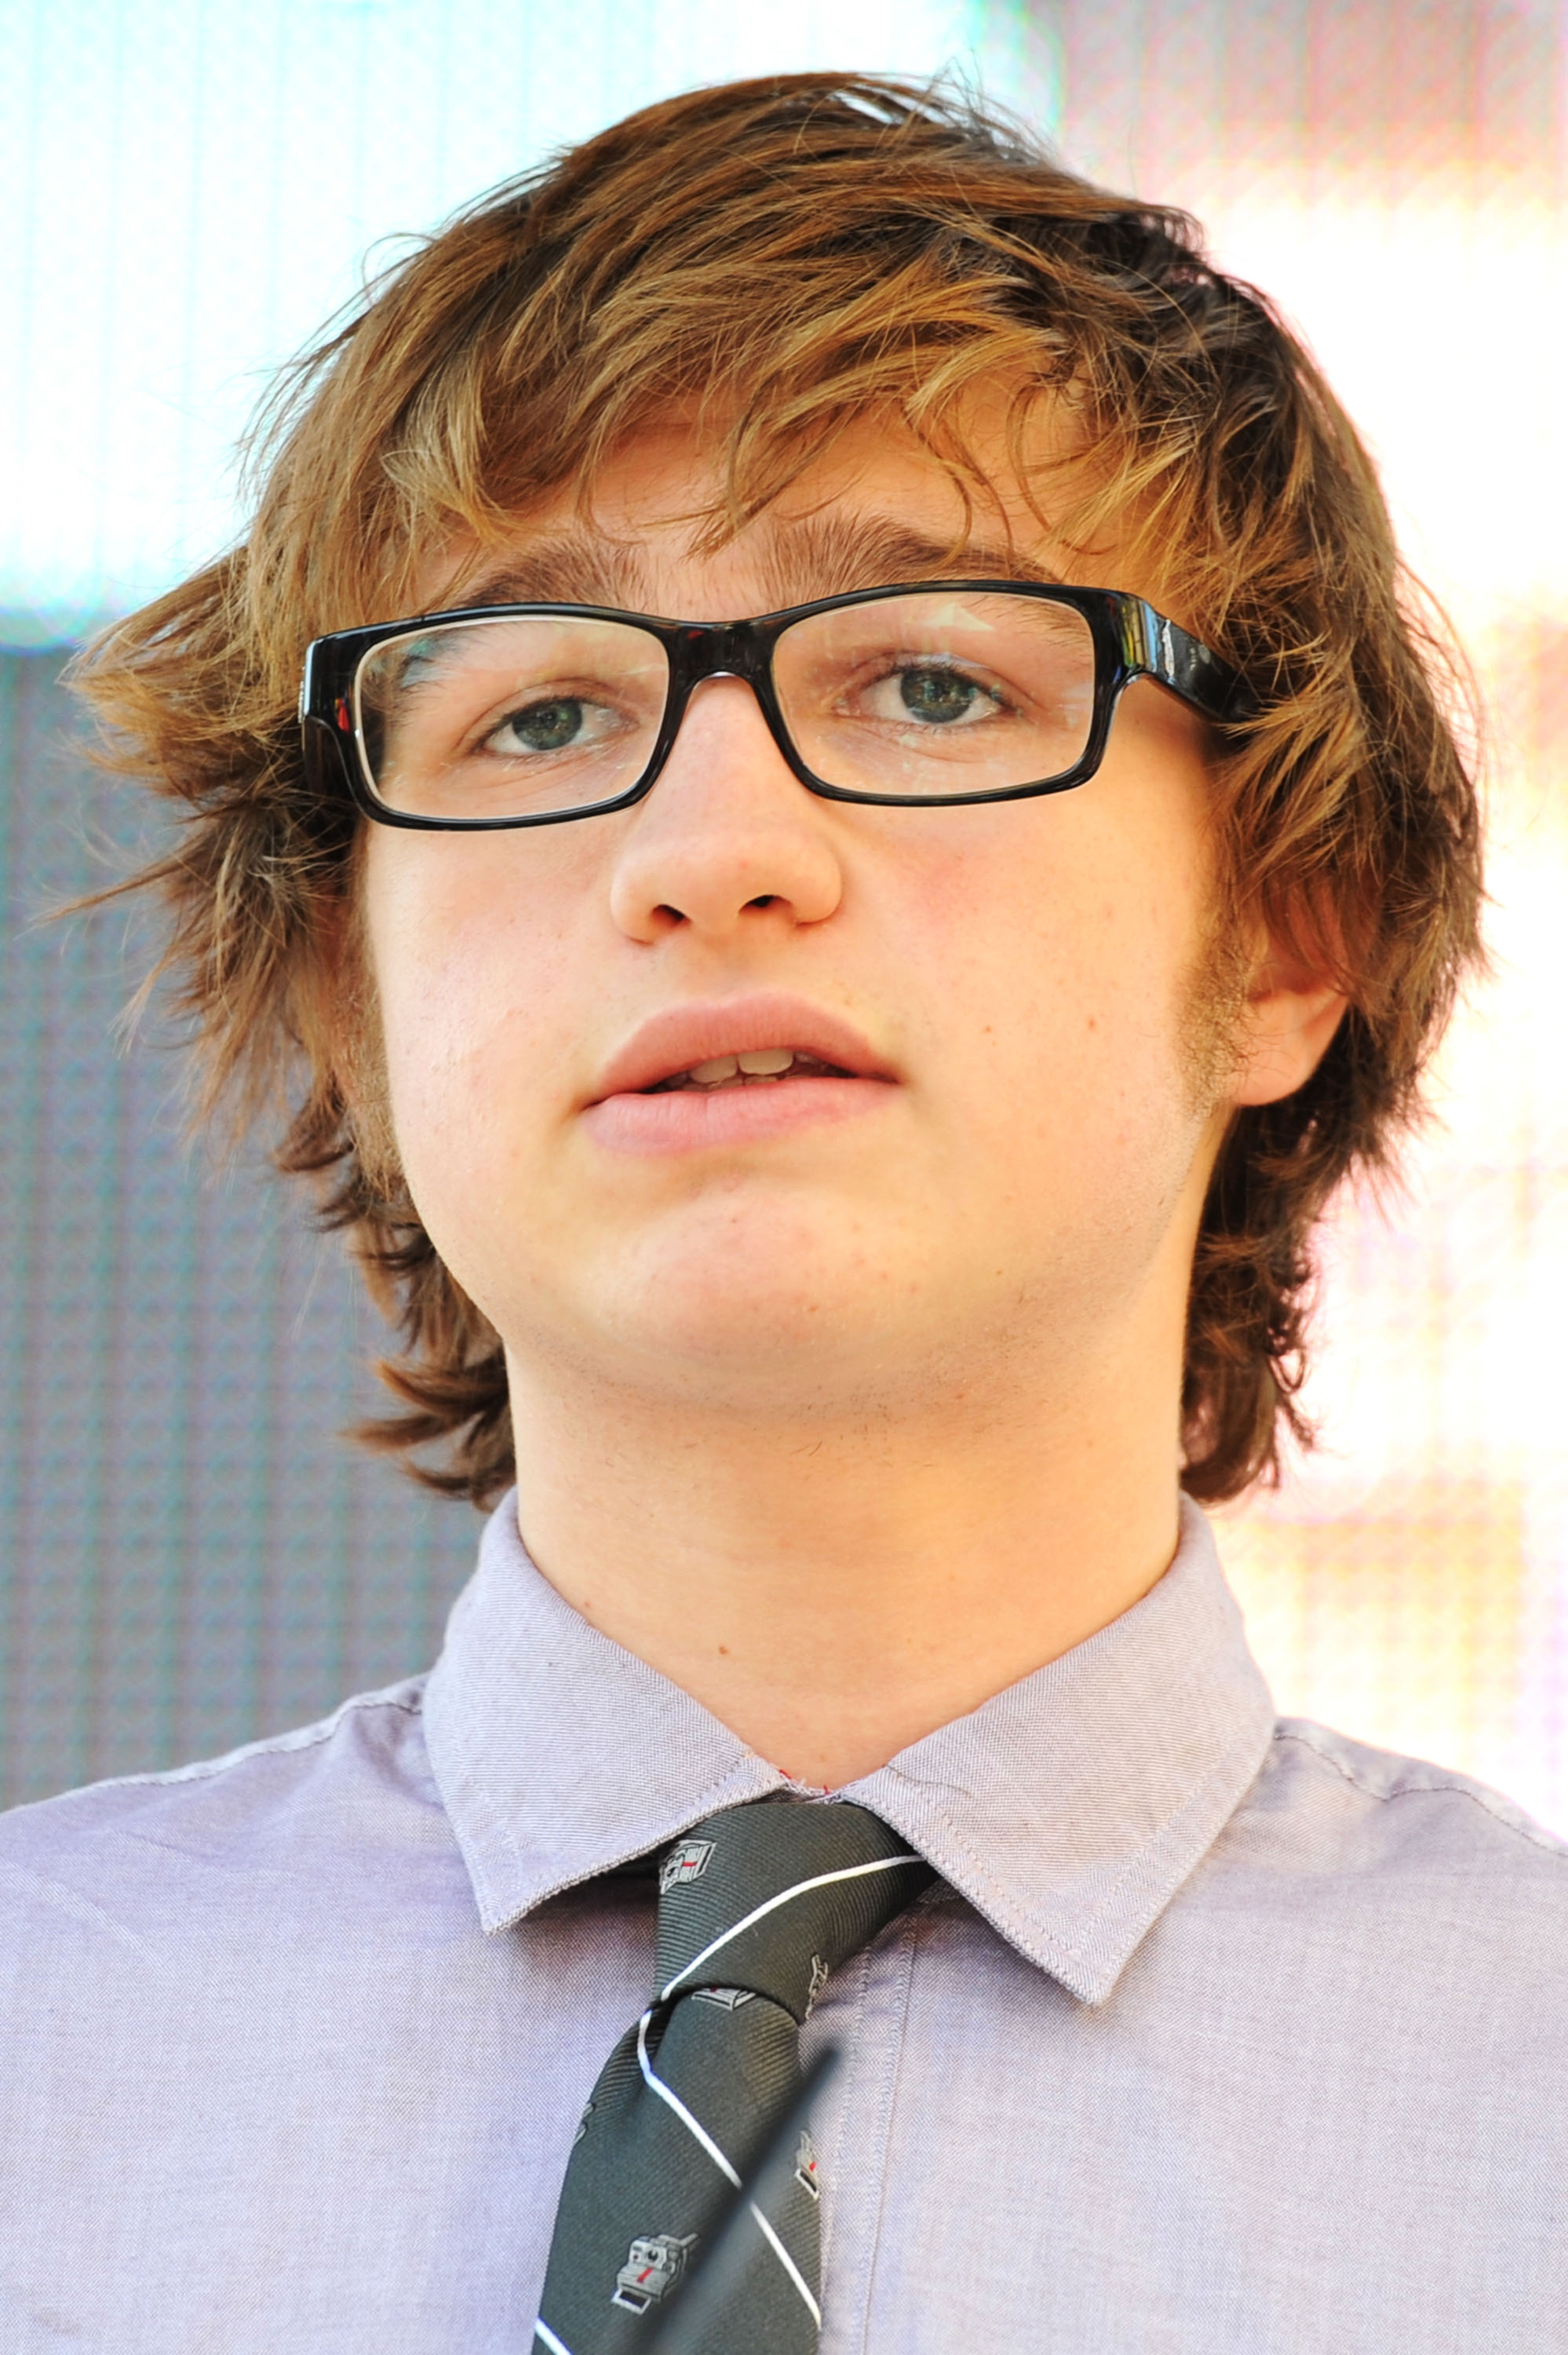 Angus T. Jones at the Variety's 5th annual Power Of Youth event in Los Angeles in 2011 | Source: Getty Images